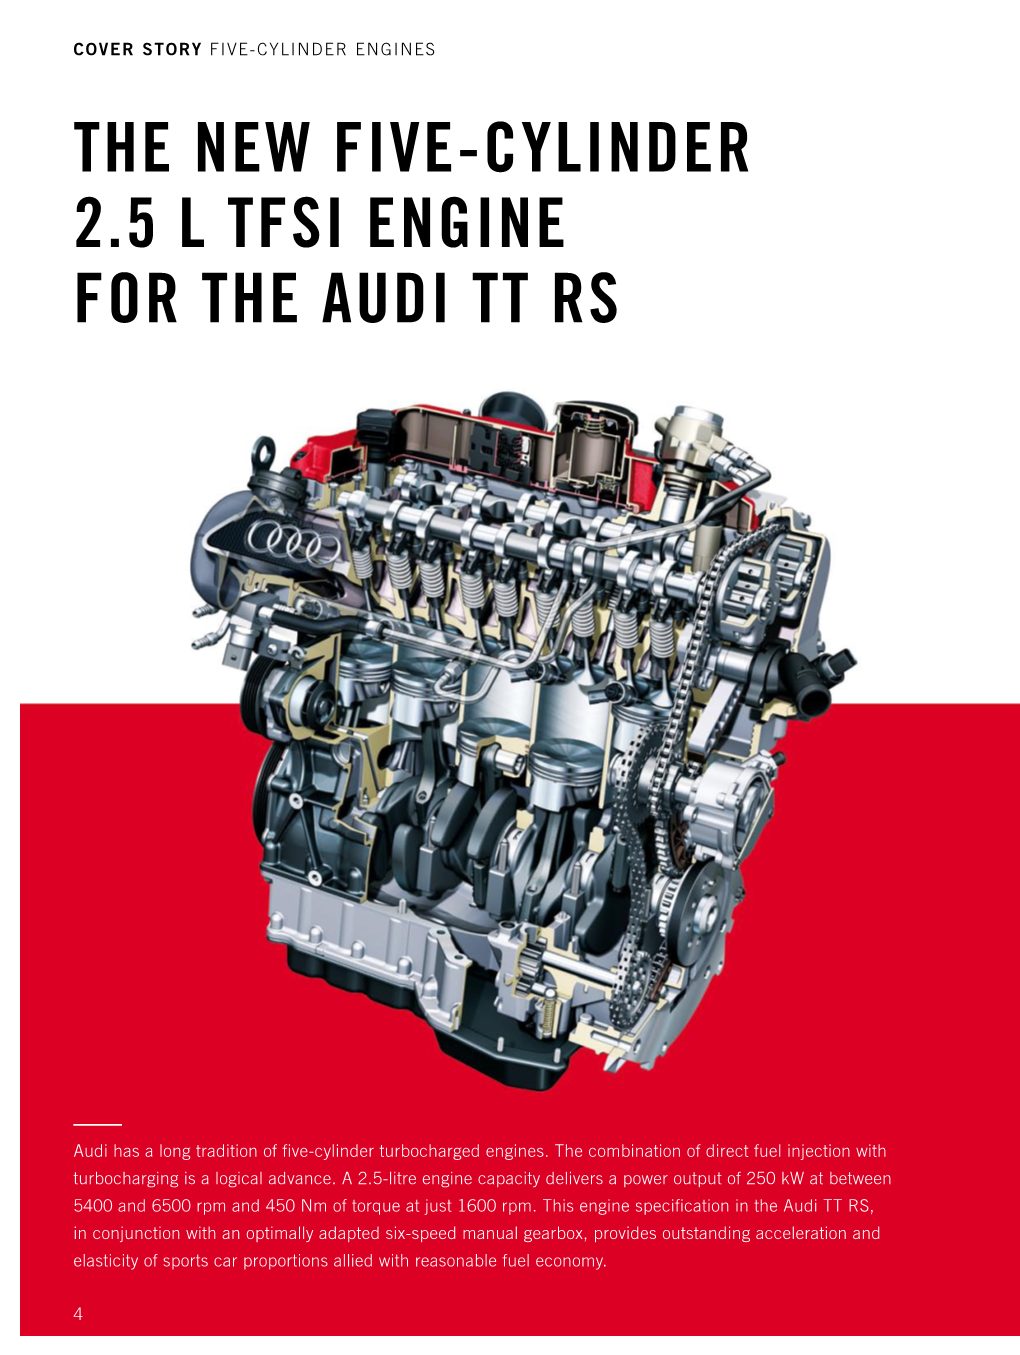 The New Five-Cylinder 2.5 L TFSI Engine for the Audi TT RS